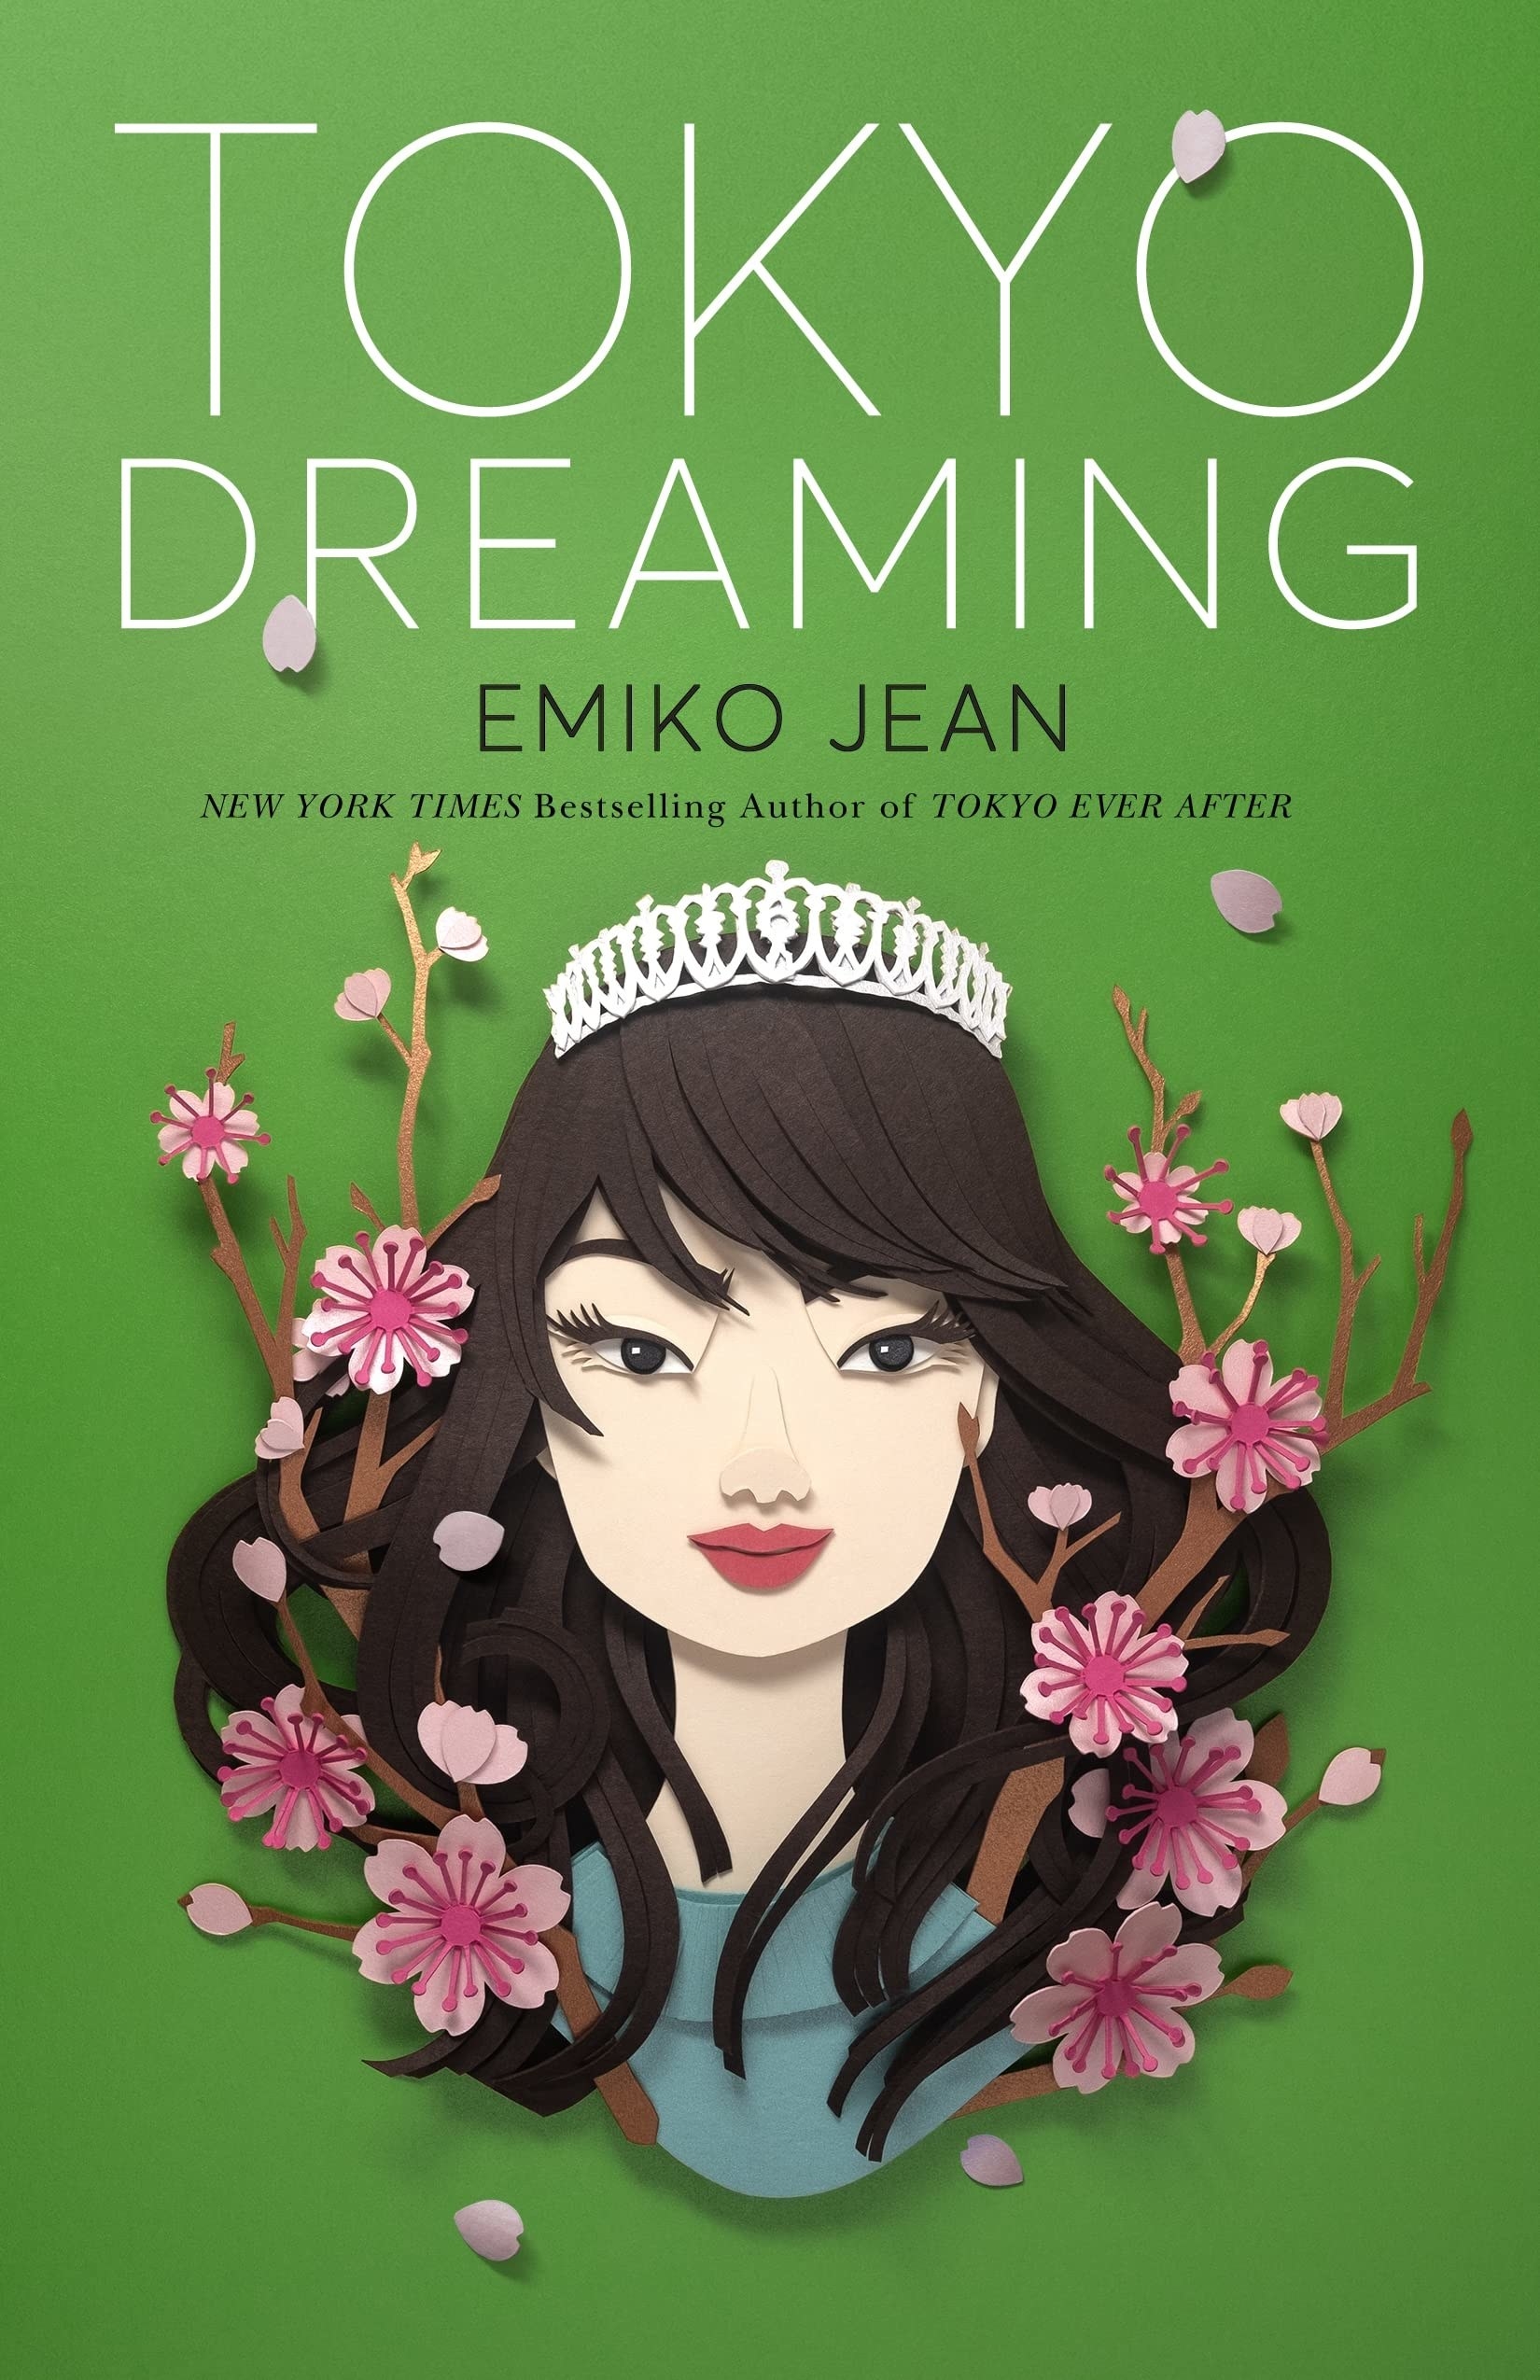 &quot;Tokyo Dreaming&quot; cover illustration of a young woman wearing a tiara